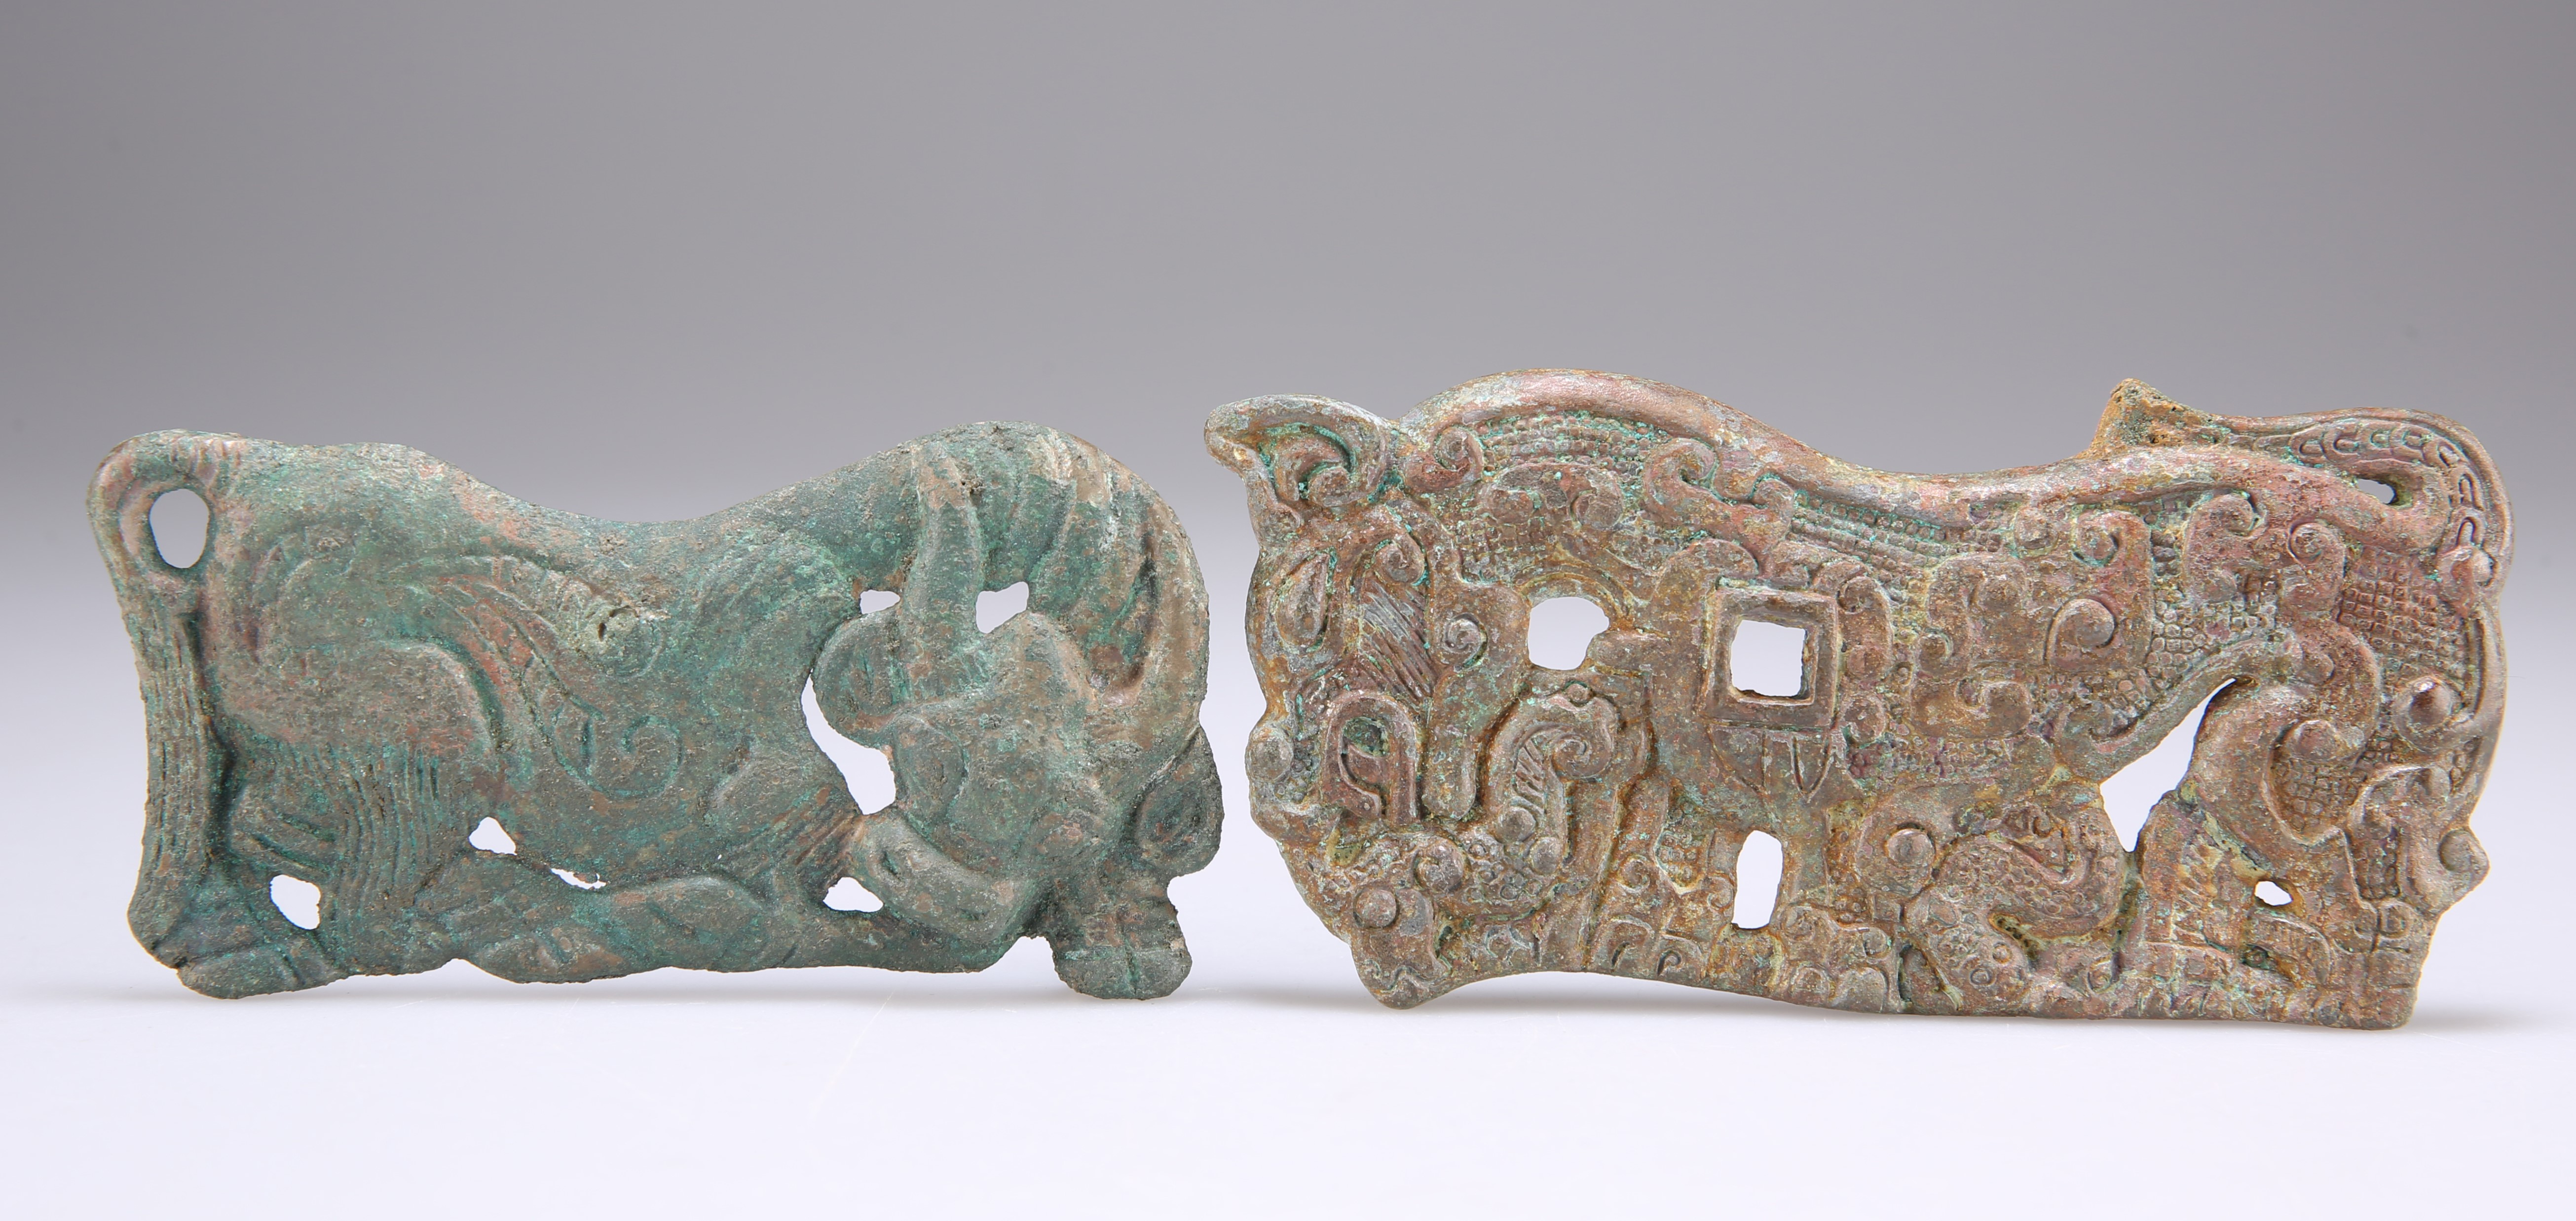 TWO INNER OR OUTER MONGOLIA BRONZE PLAQUES, WARRING STATES PERIOD AND HAN DYNASTY